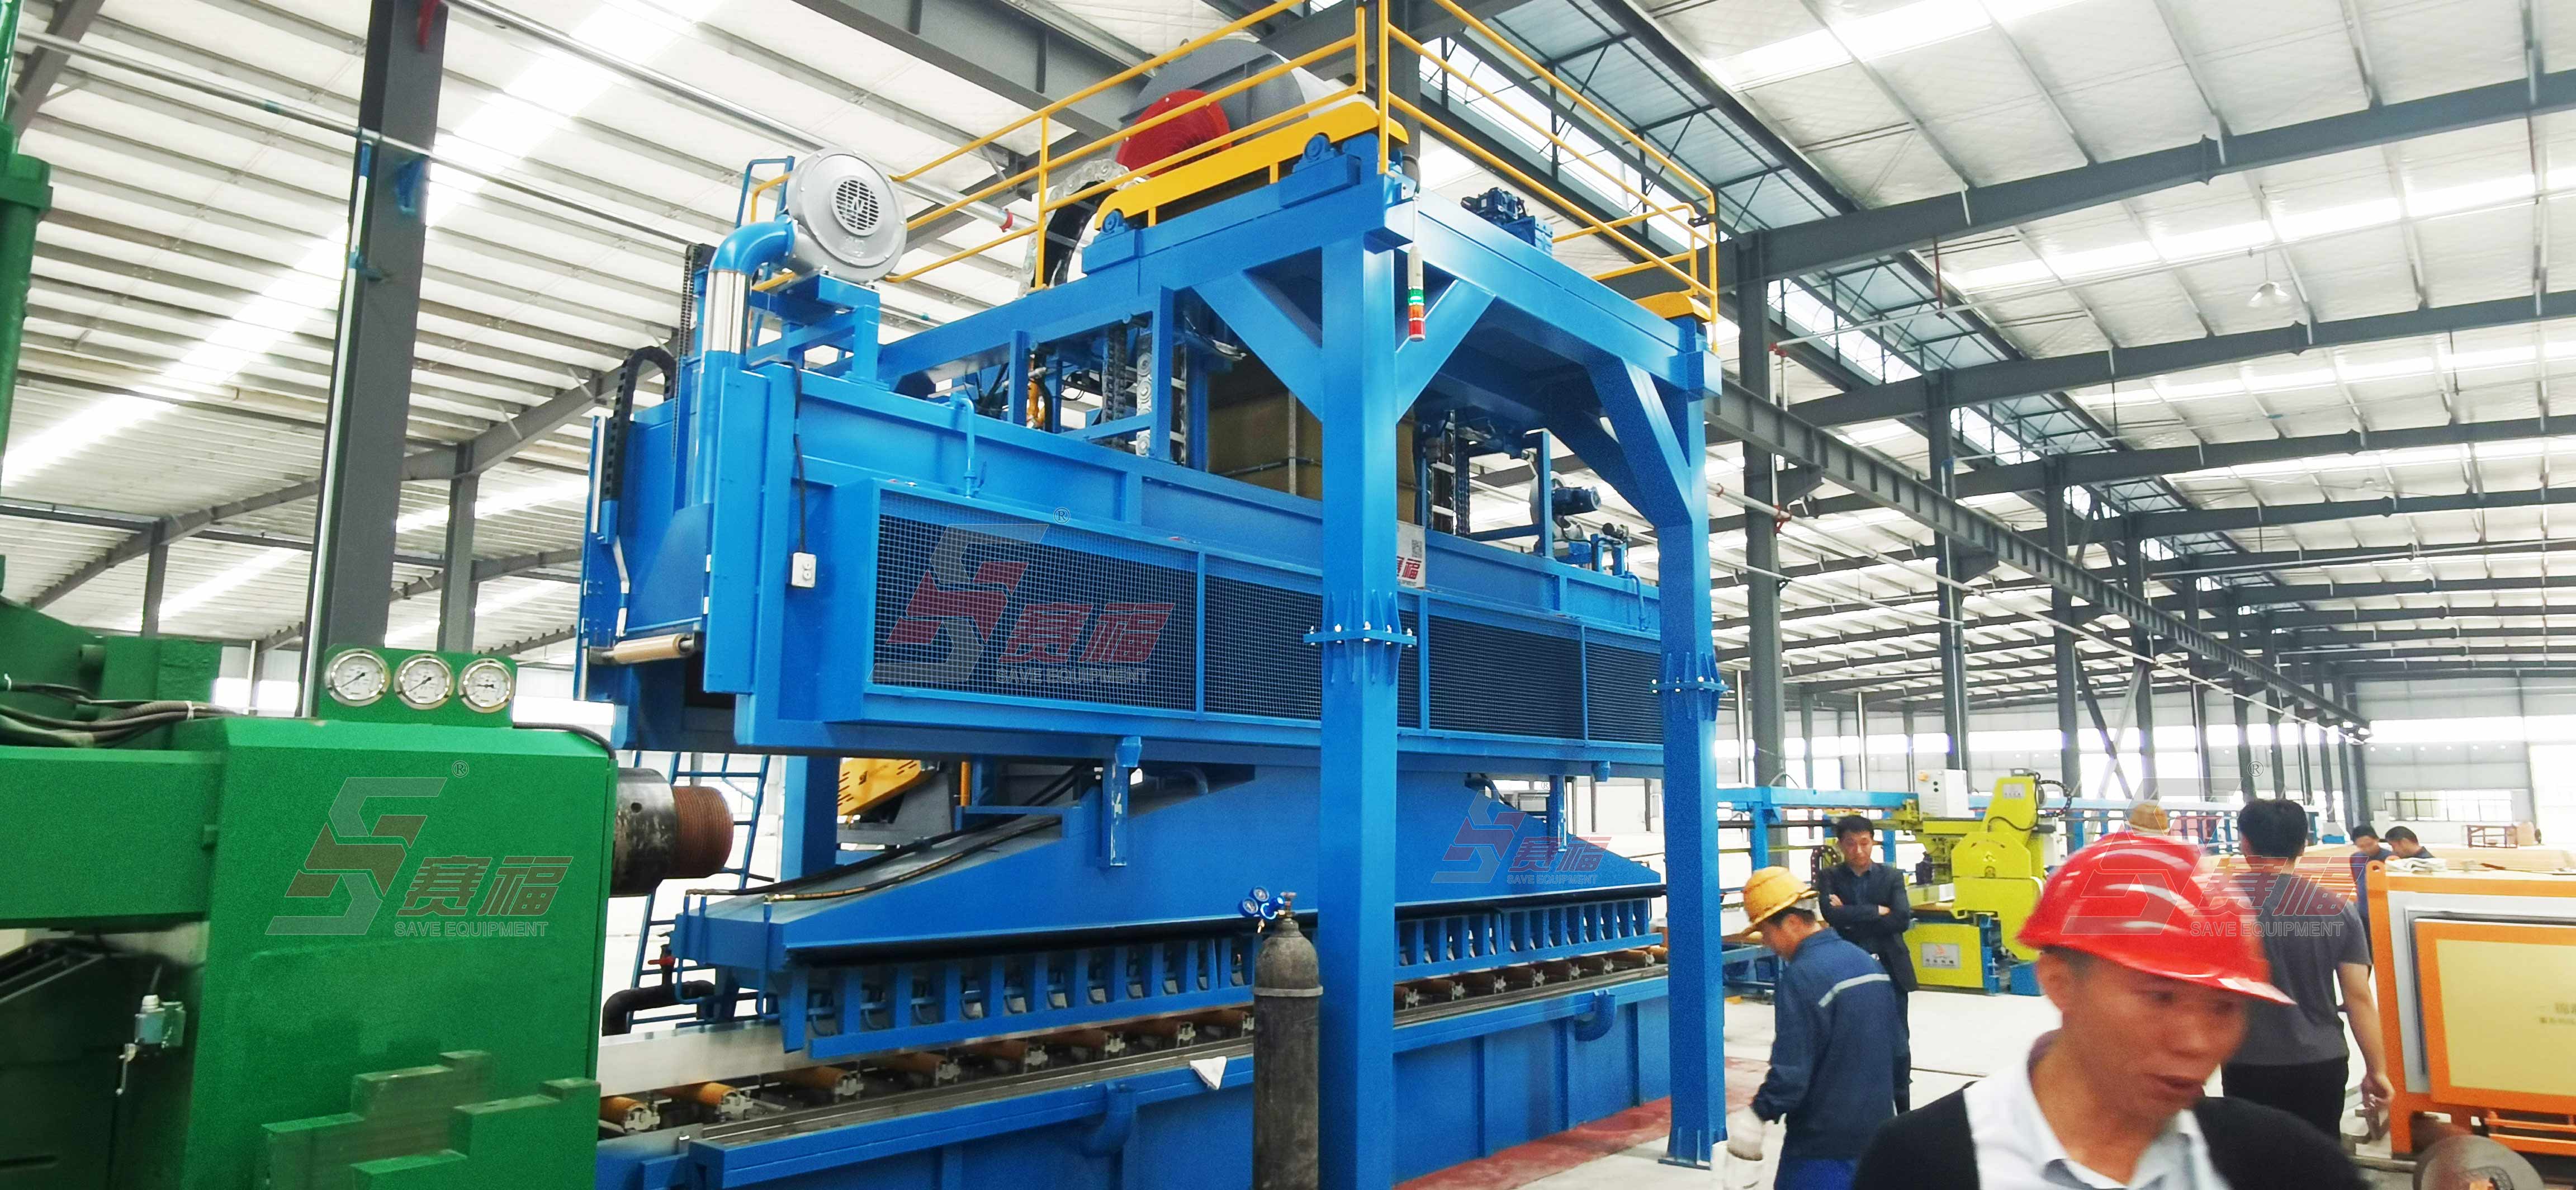 The quench equipmentfor Shandong Haomen Aluminum had been installed and already start to produce successfully